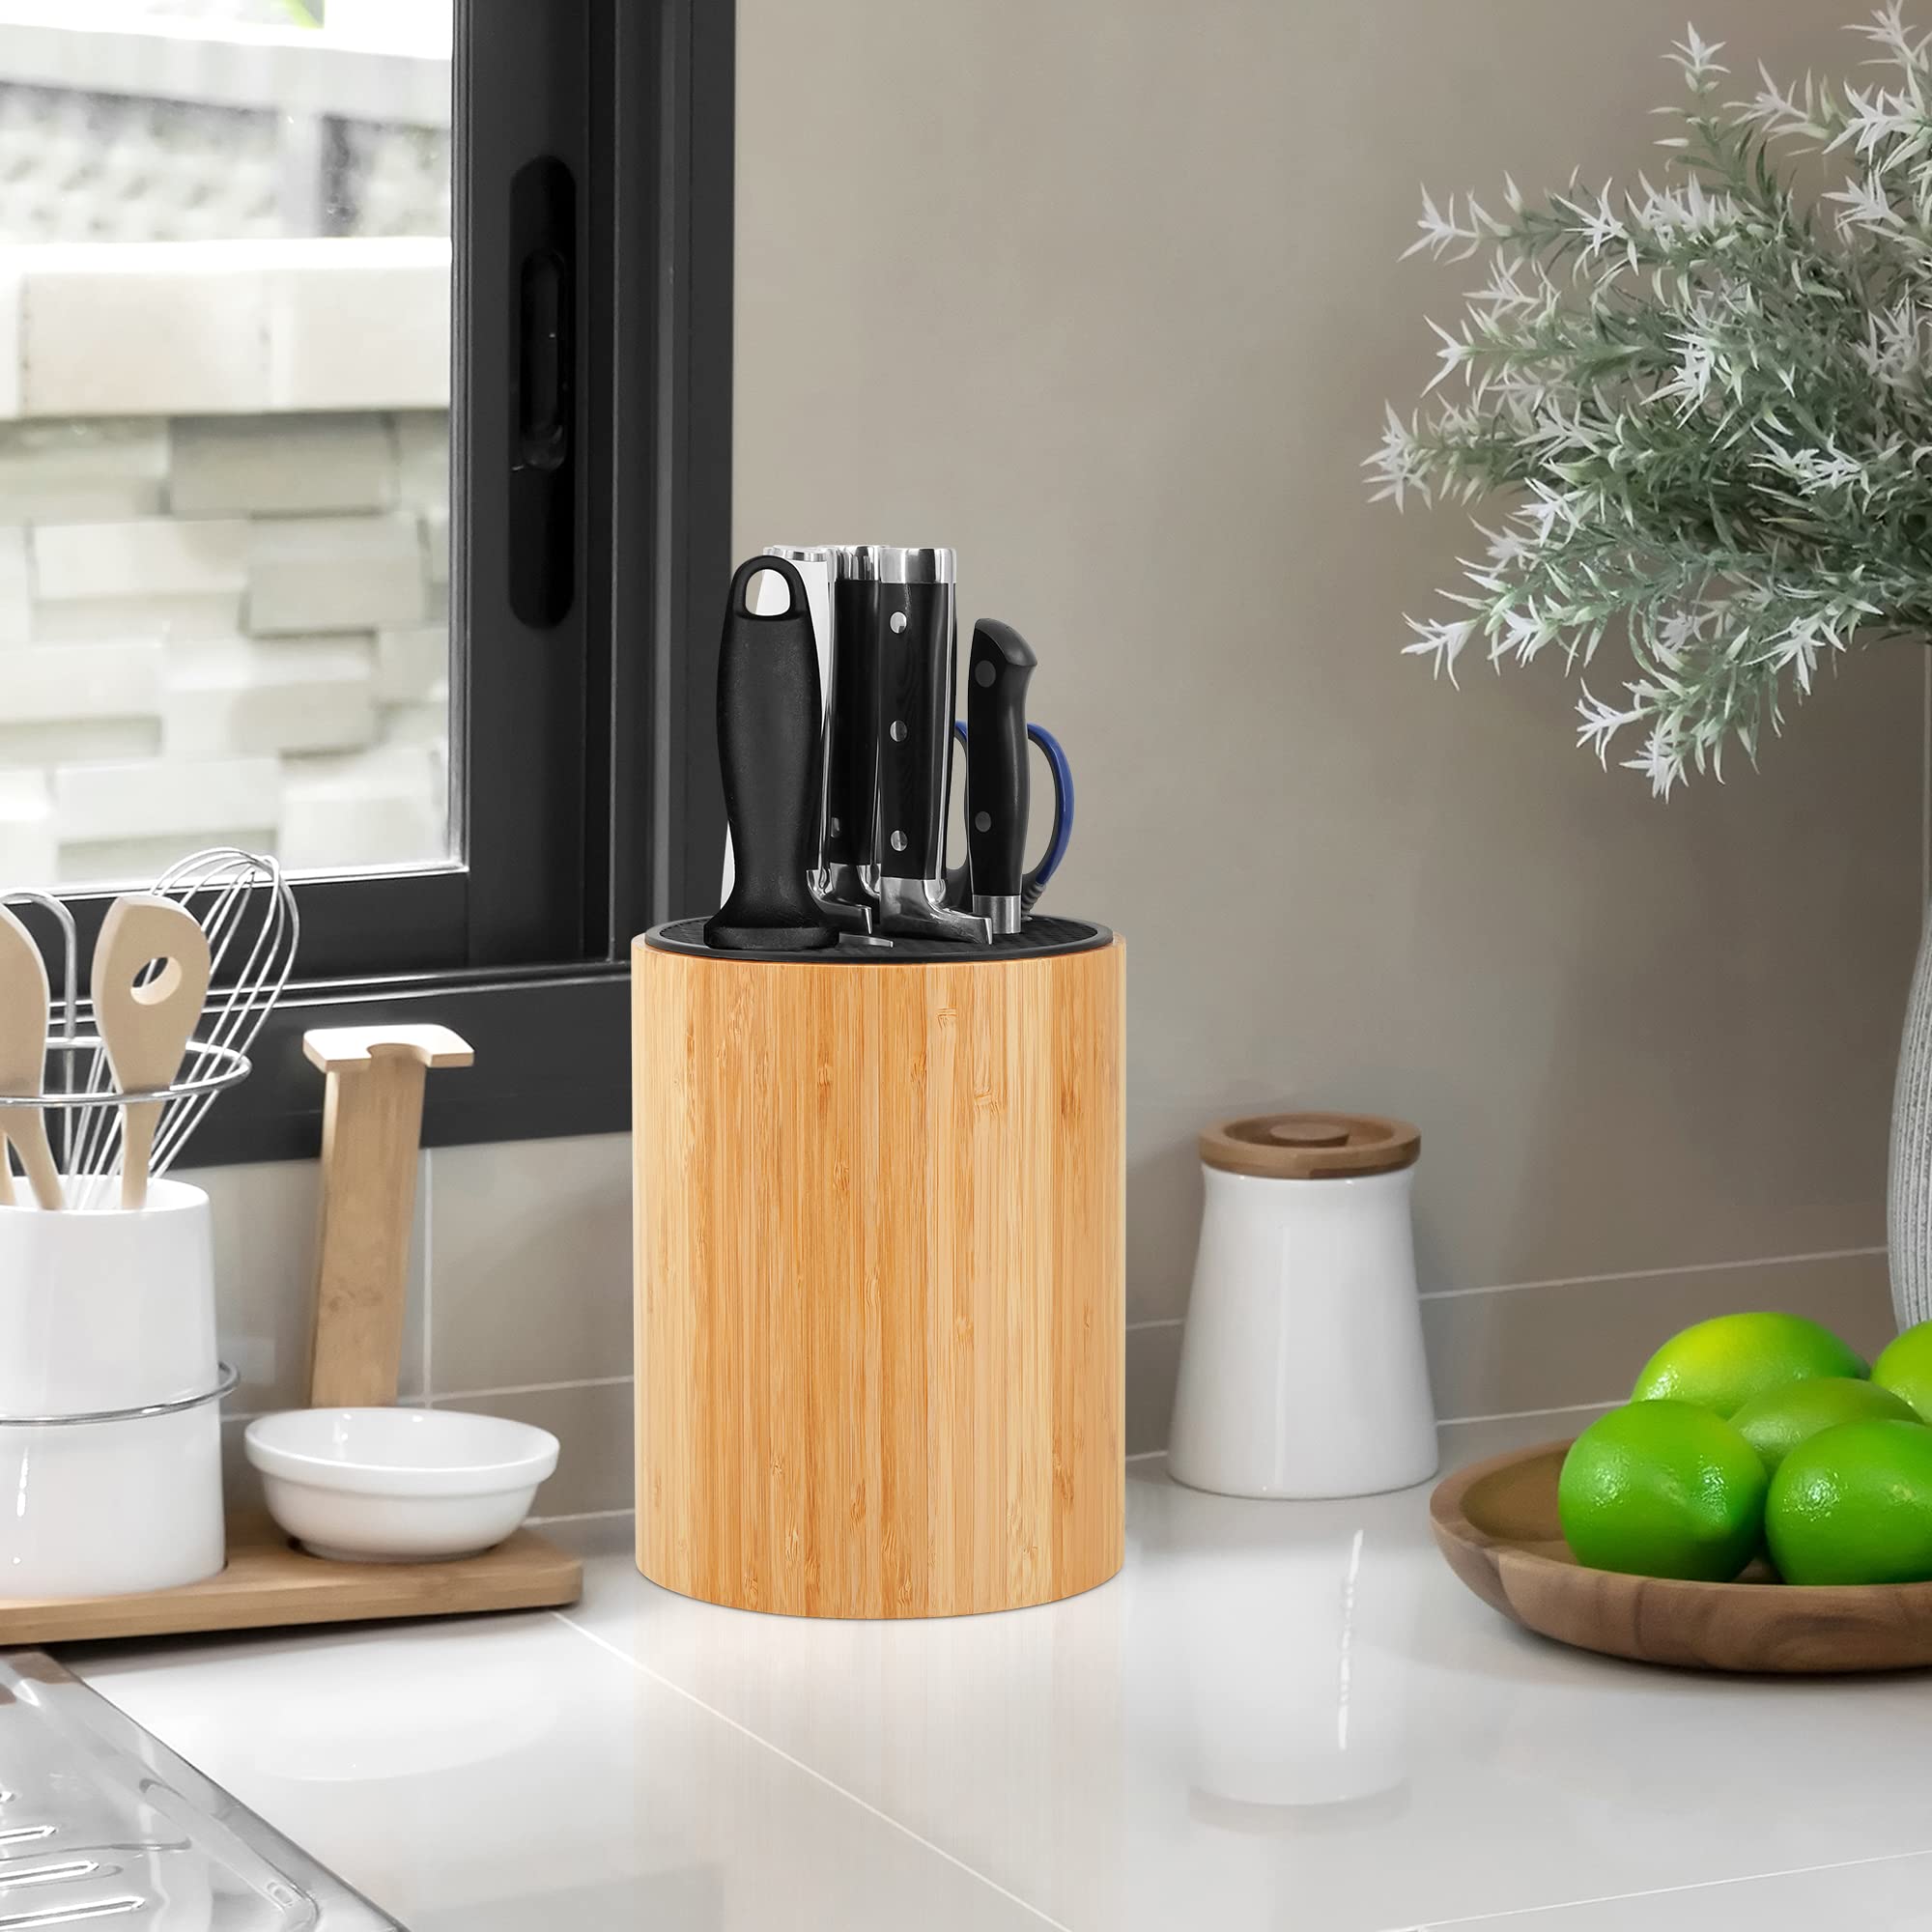 VaeFae Bamboo Round Knife Holder with Slots for Knife Sharpener and Scissors, Universal Knife Block, Kitchen Knife Storage with Unique Slot Design